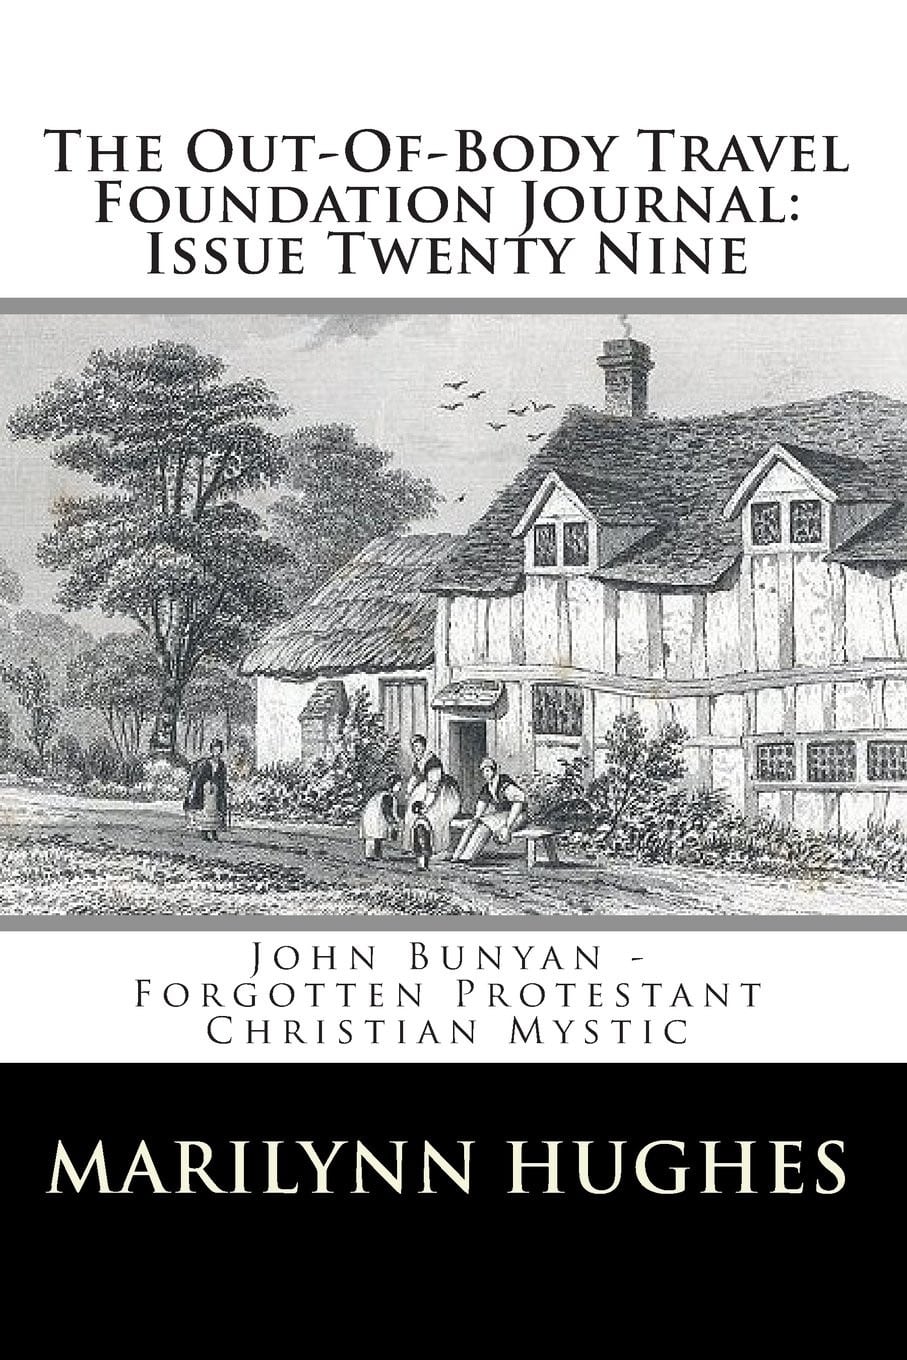 John Bunyan – Forgotten Protestant Christian Mystic, Compiled and Edited by Marilynn Hughes